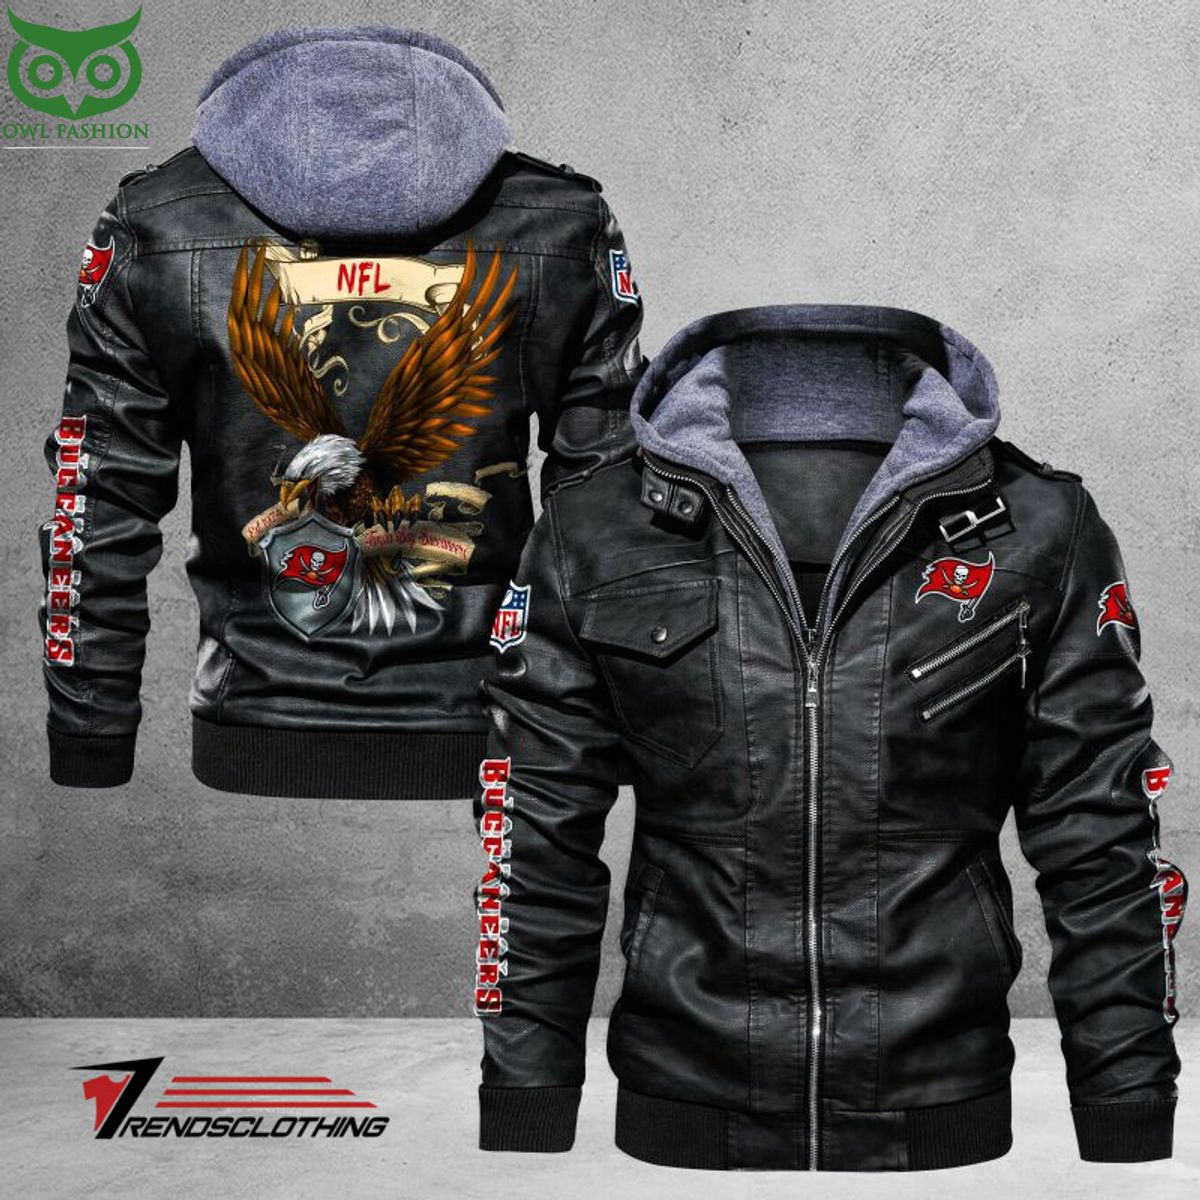 Owl Leather 2D Fashion Jacket Trending Buccaneers - Tampa Bay Shop